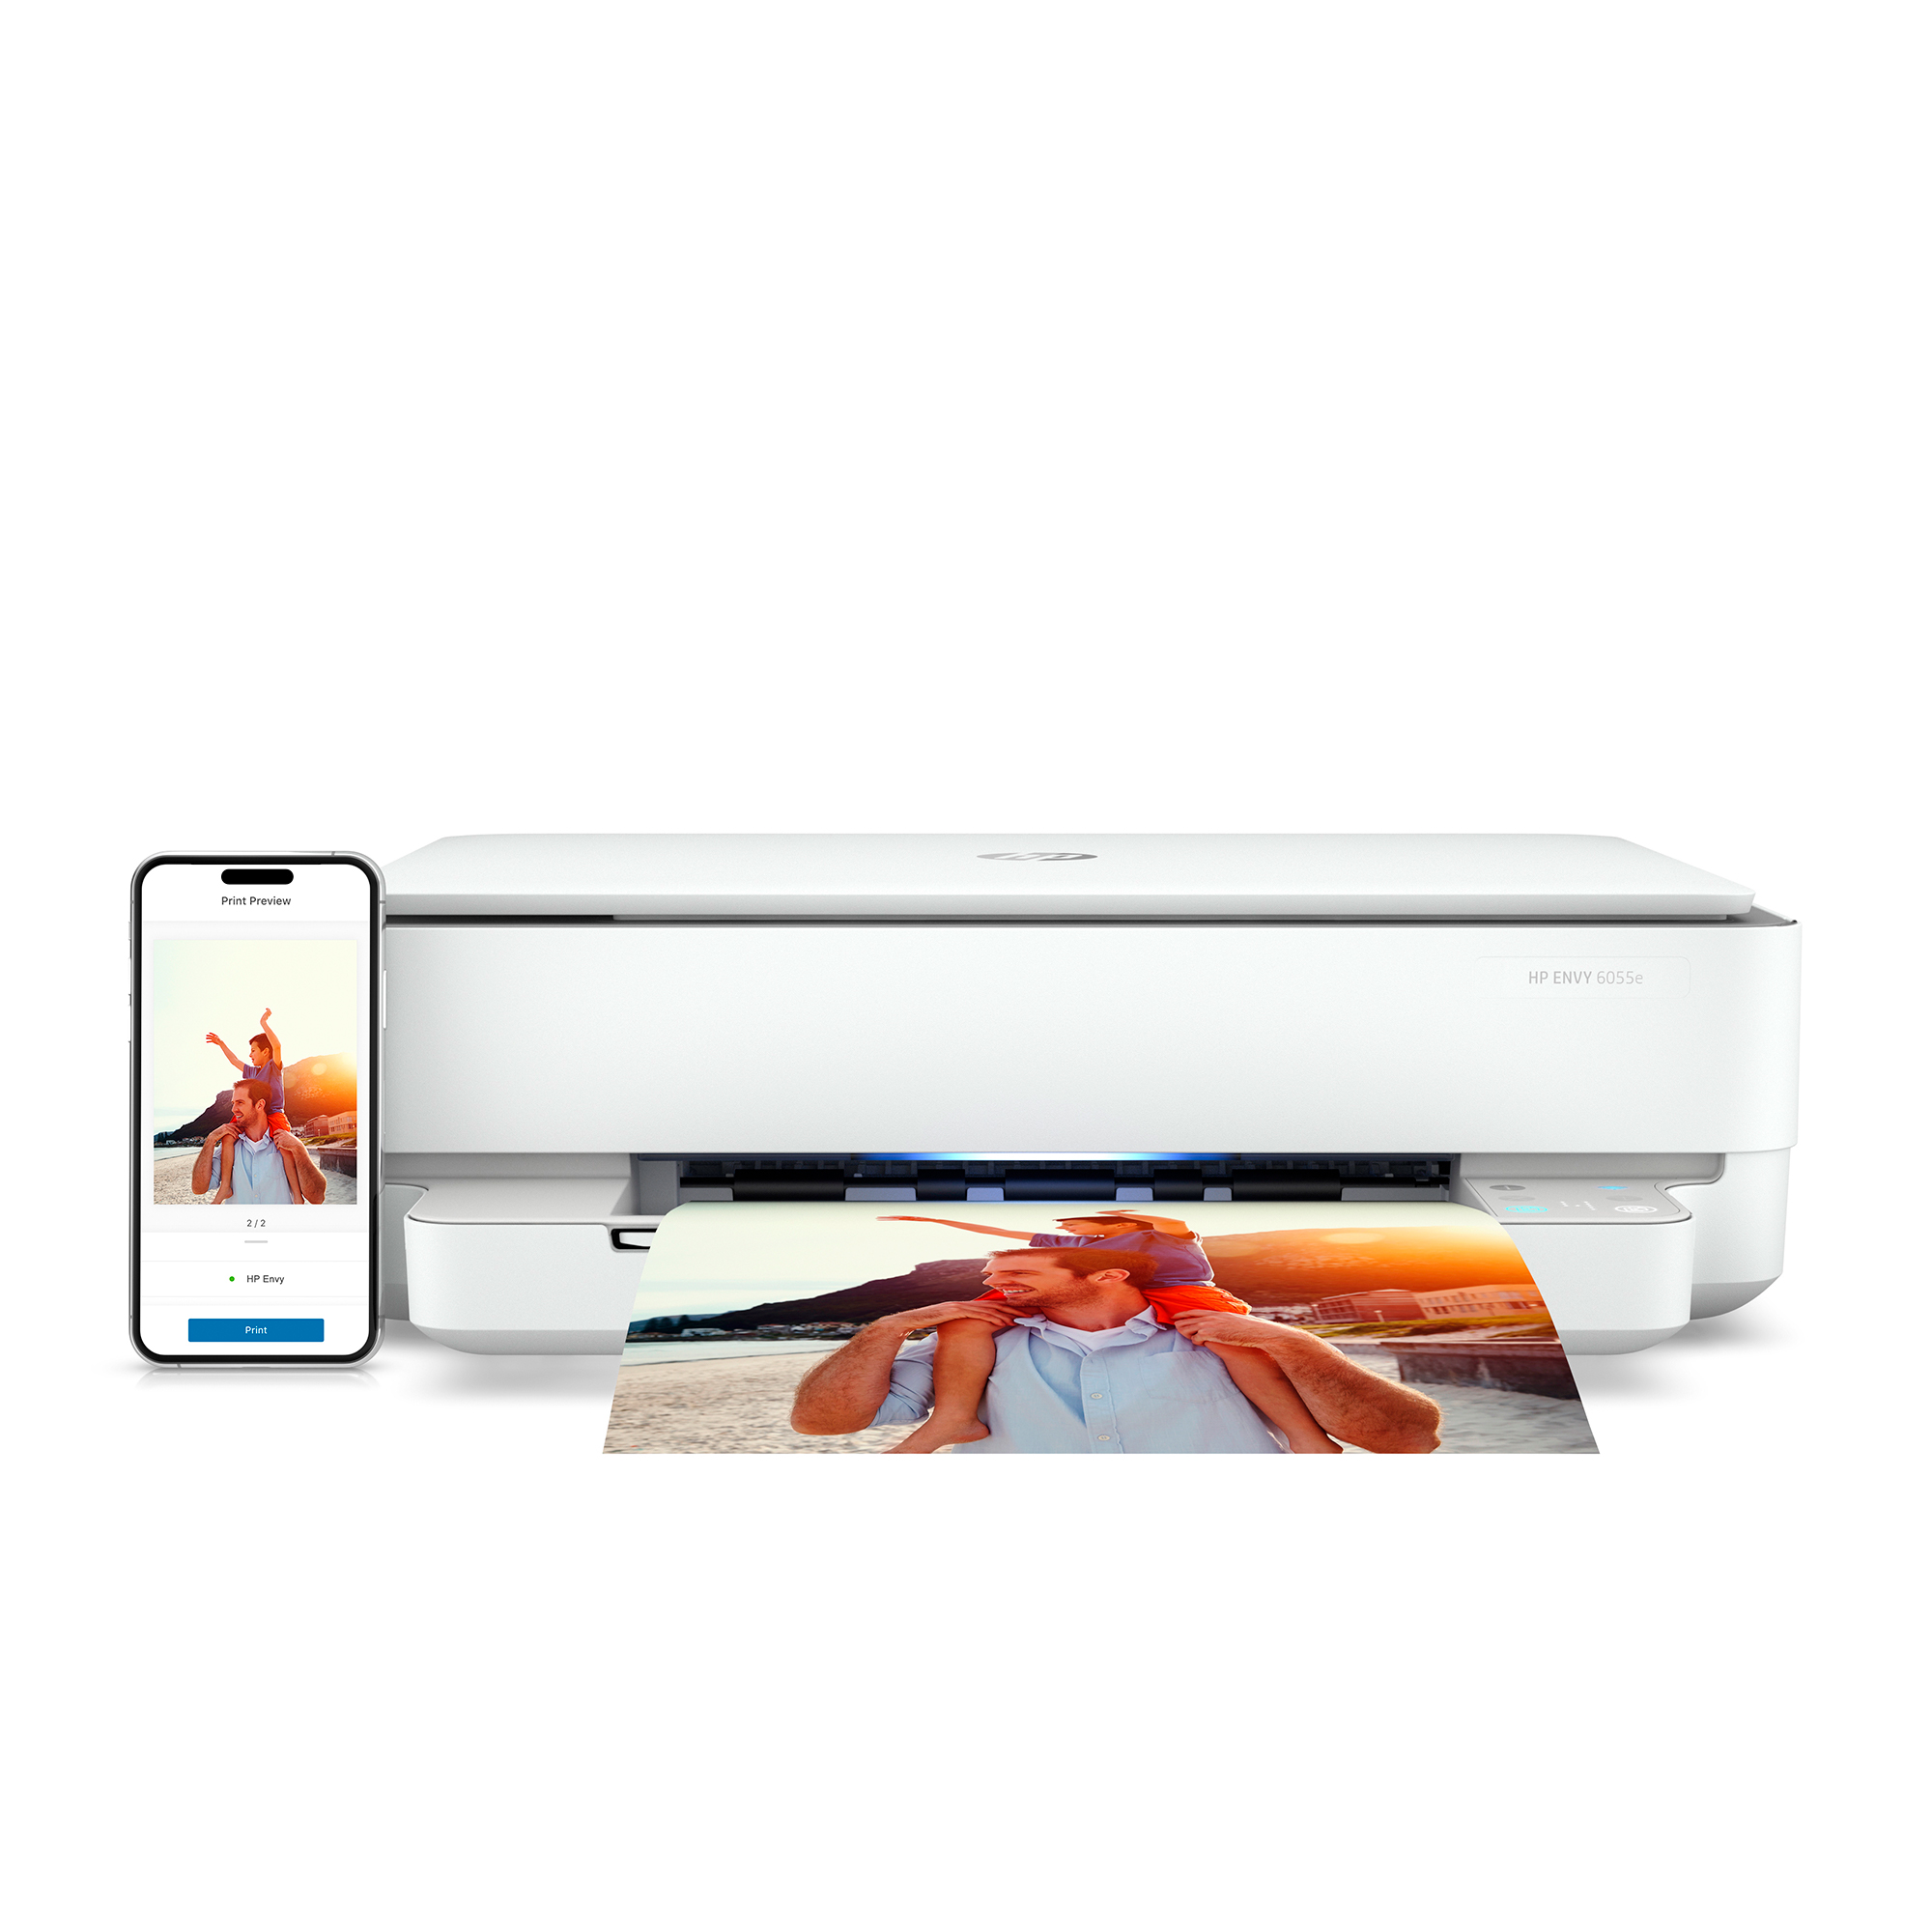 HP ENVY 6055e All-in-One Wireless Color Inkjet Printer -  3 Months Free Instant Ink with HP+ - image 5 of 19